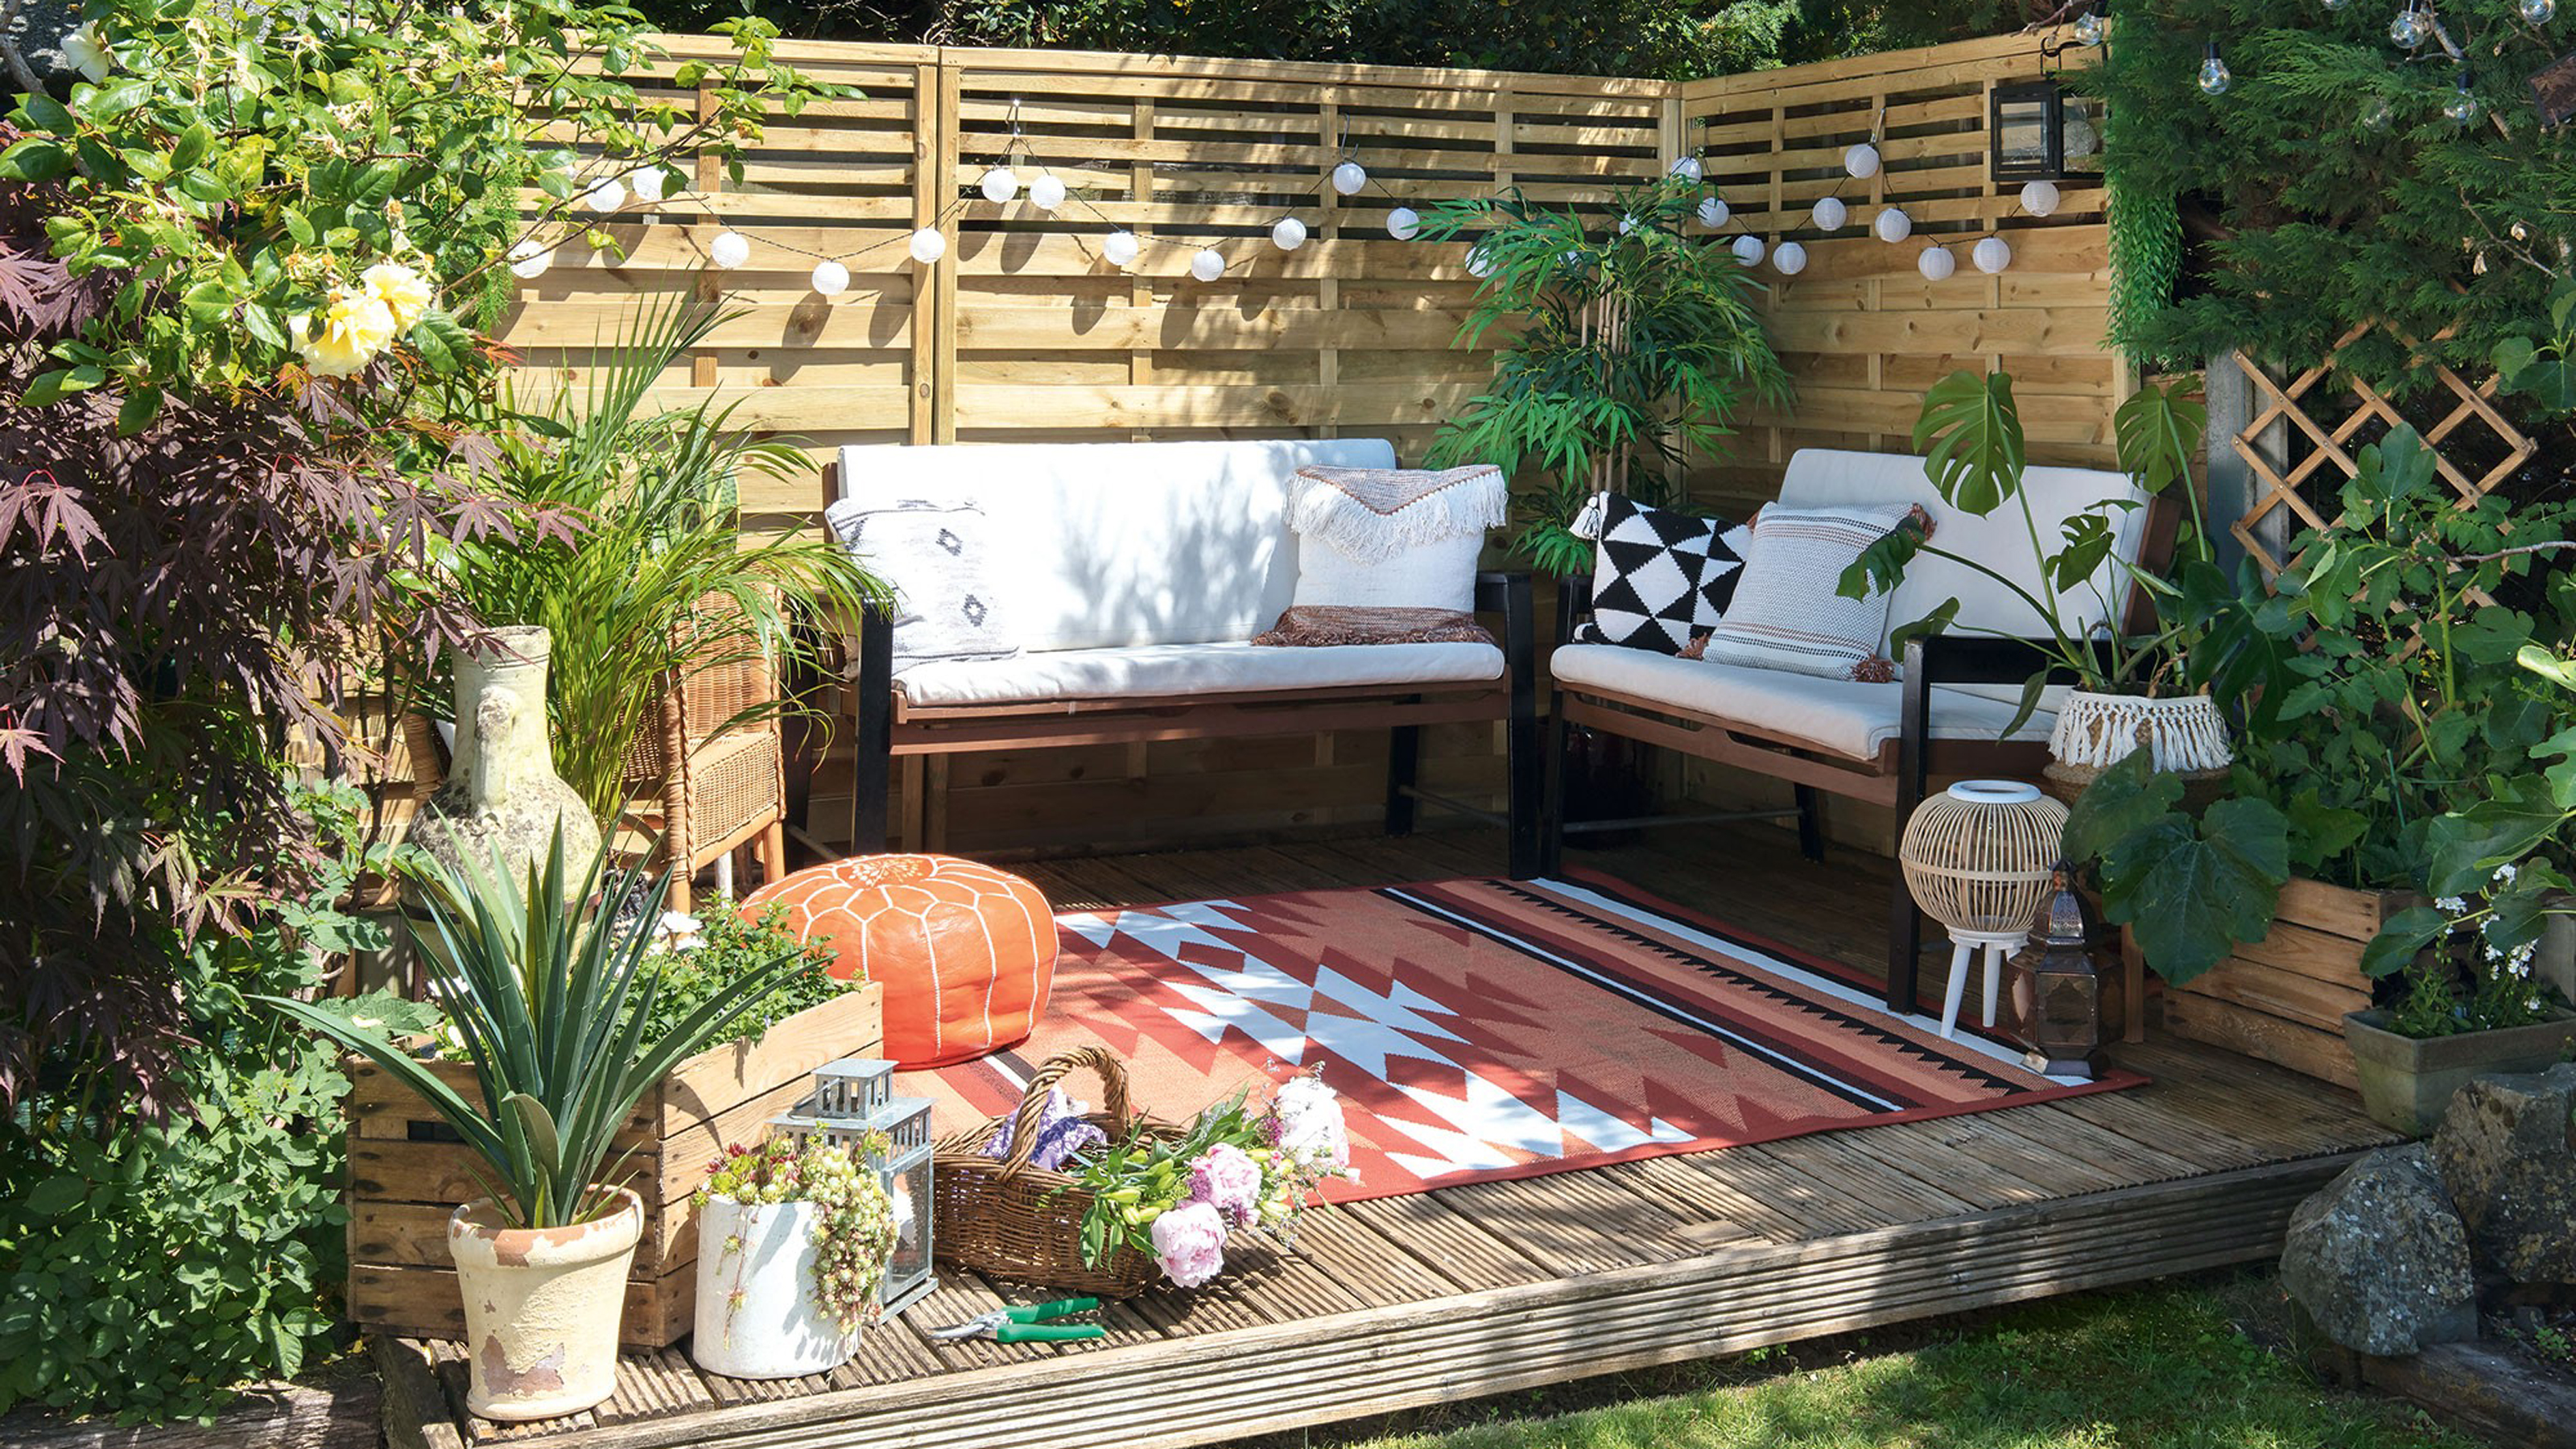 How To Plan A Small Garden – Expert Advice For Petite Spaces | Ideal Home